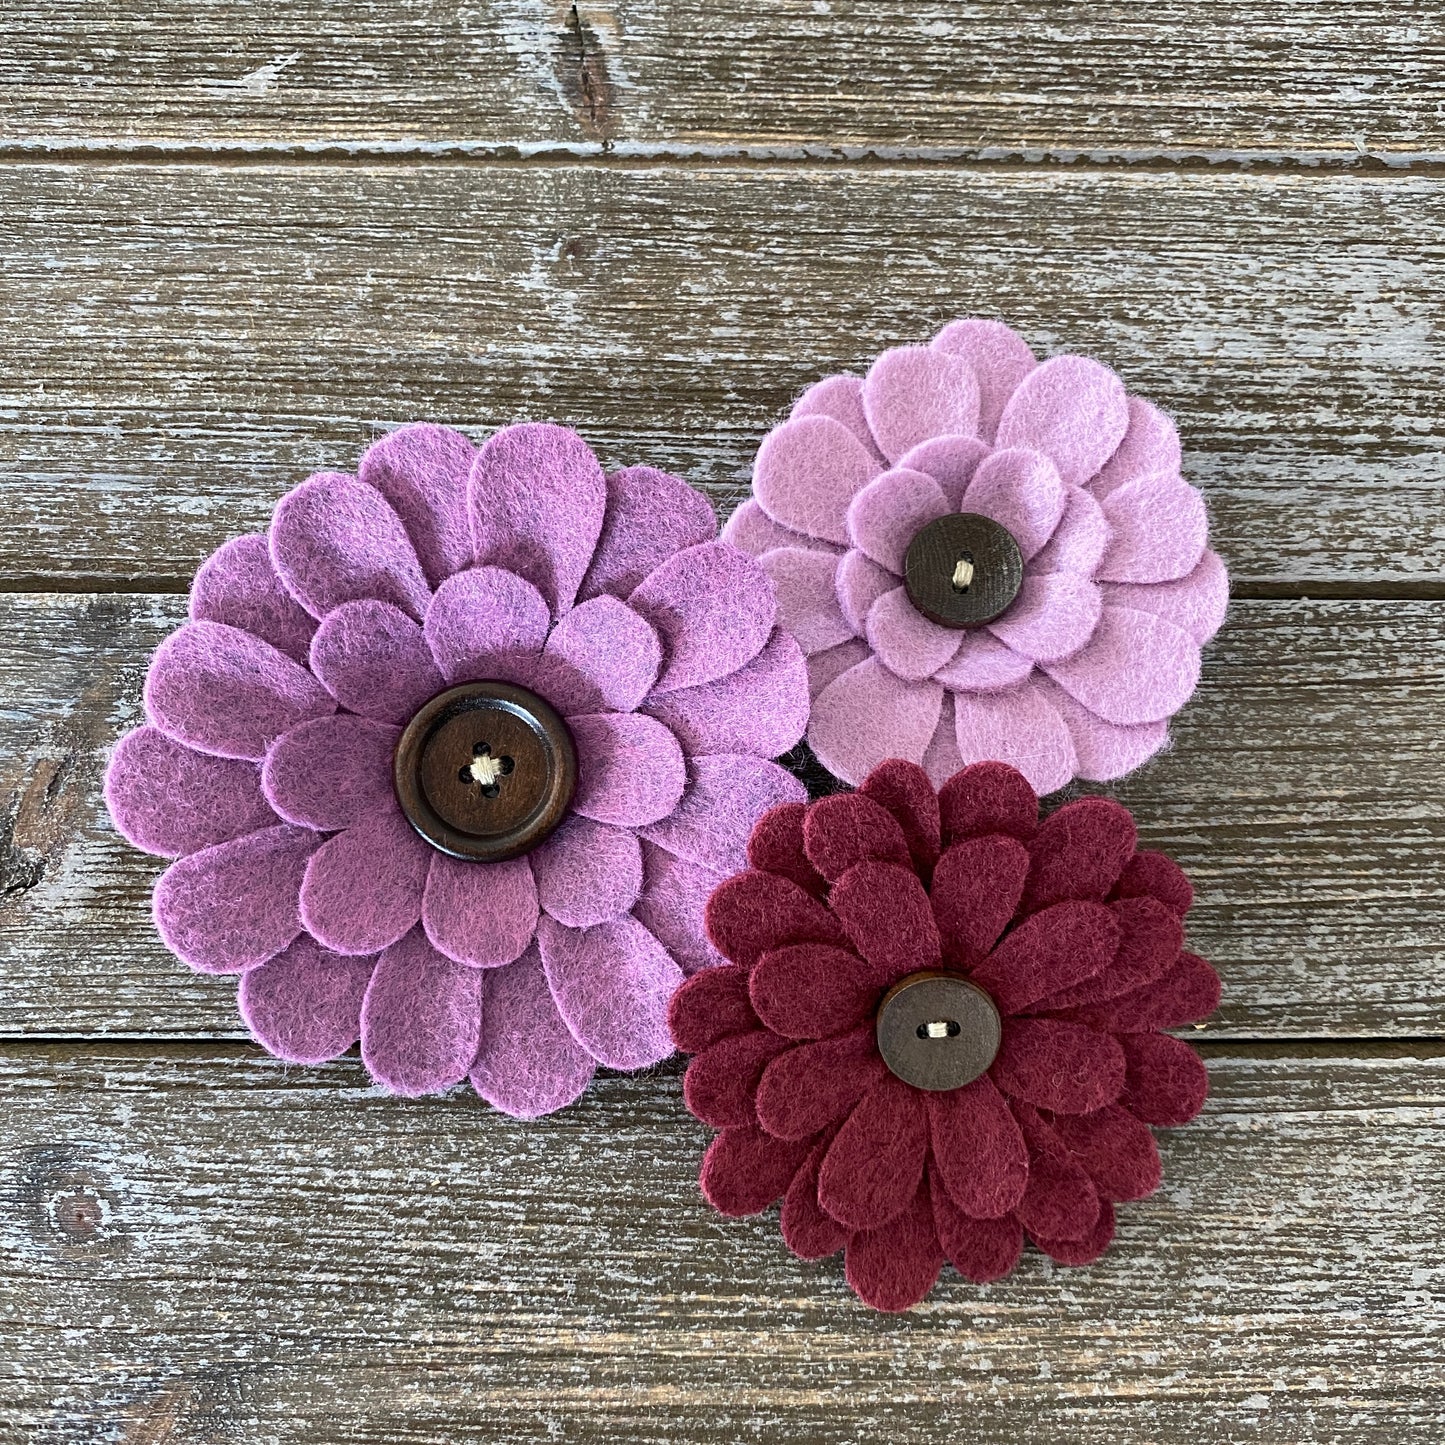 Felt Flower Embellishments for Crafts - Light Purple Flower with Wood Button - Small